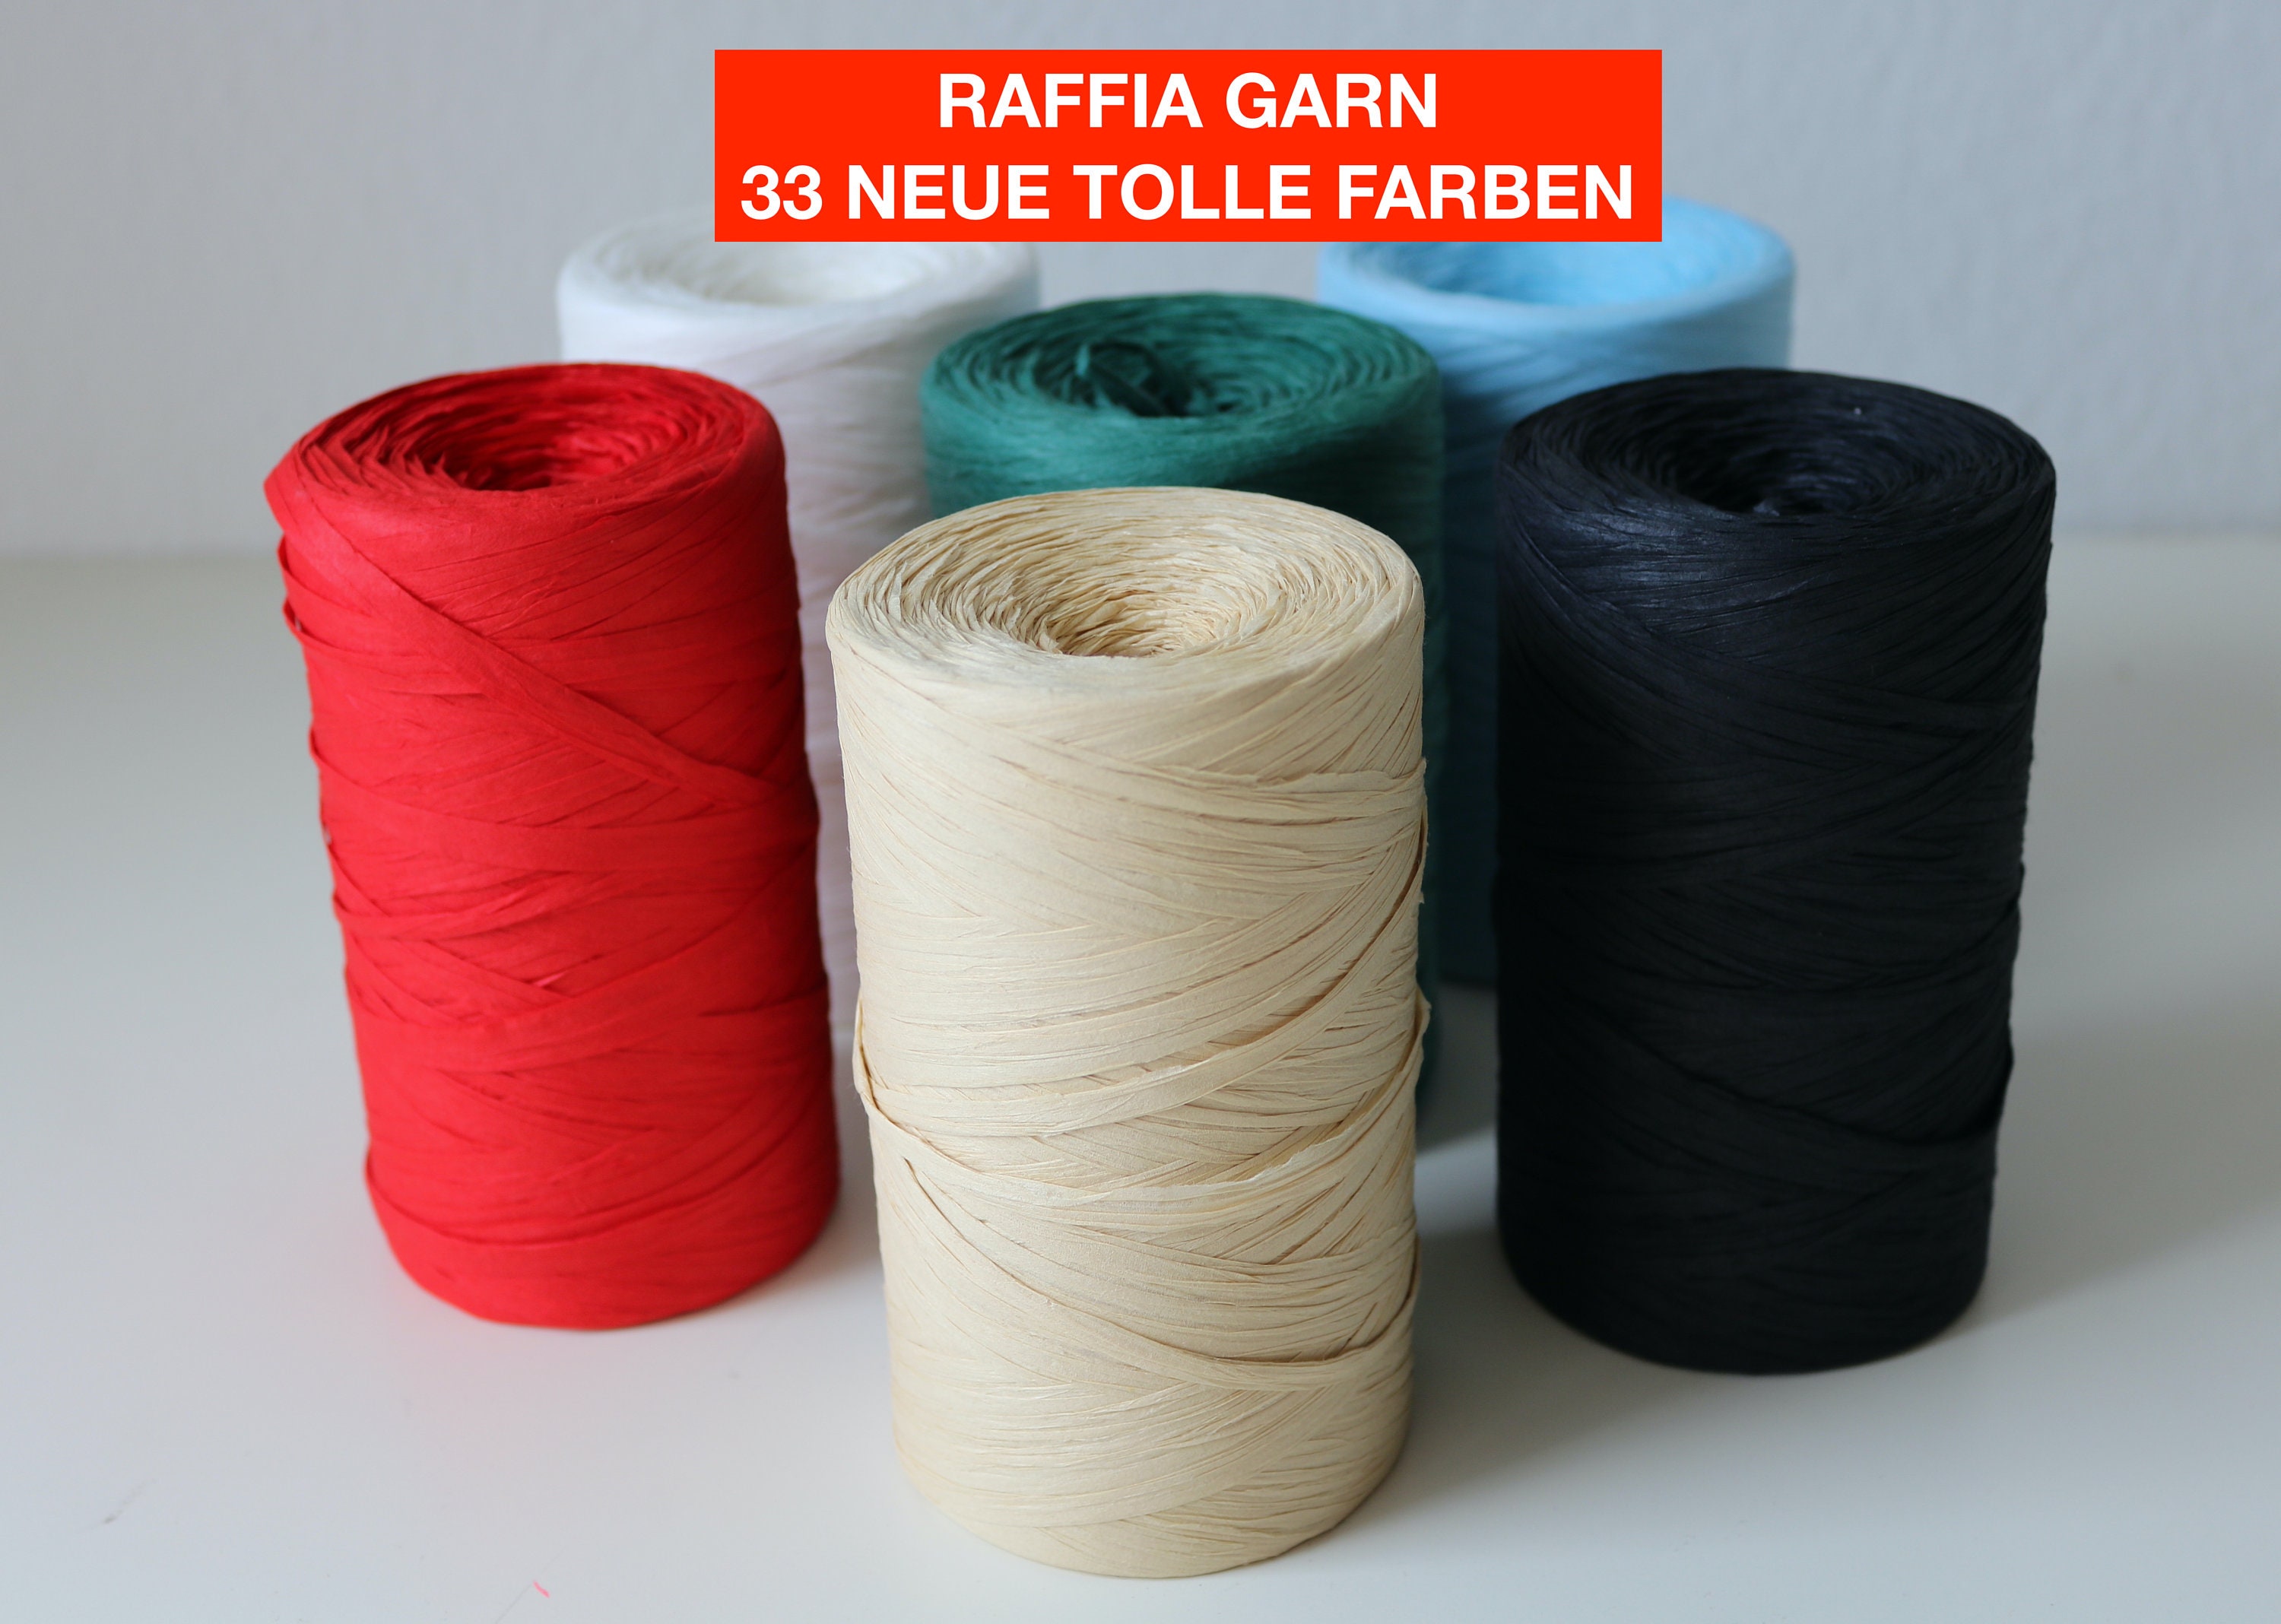 Raffia for Weaving Bags Hats Jewellery Embroidery Craft. 26 Colours  Natural, Eco Friendly, Sustainable Crop. Soft, Supple, Vibrant Colors 